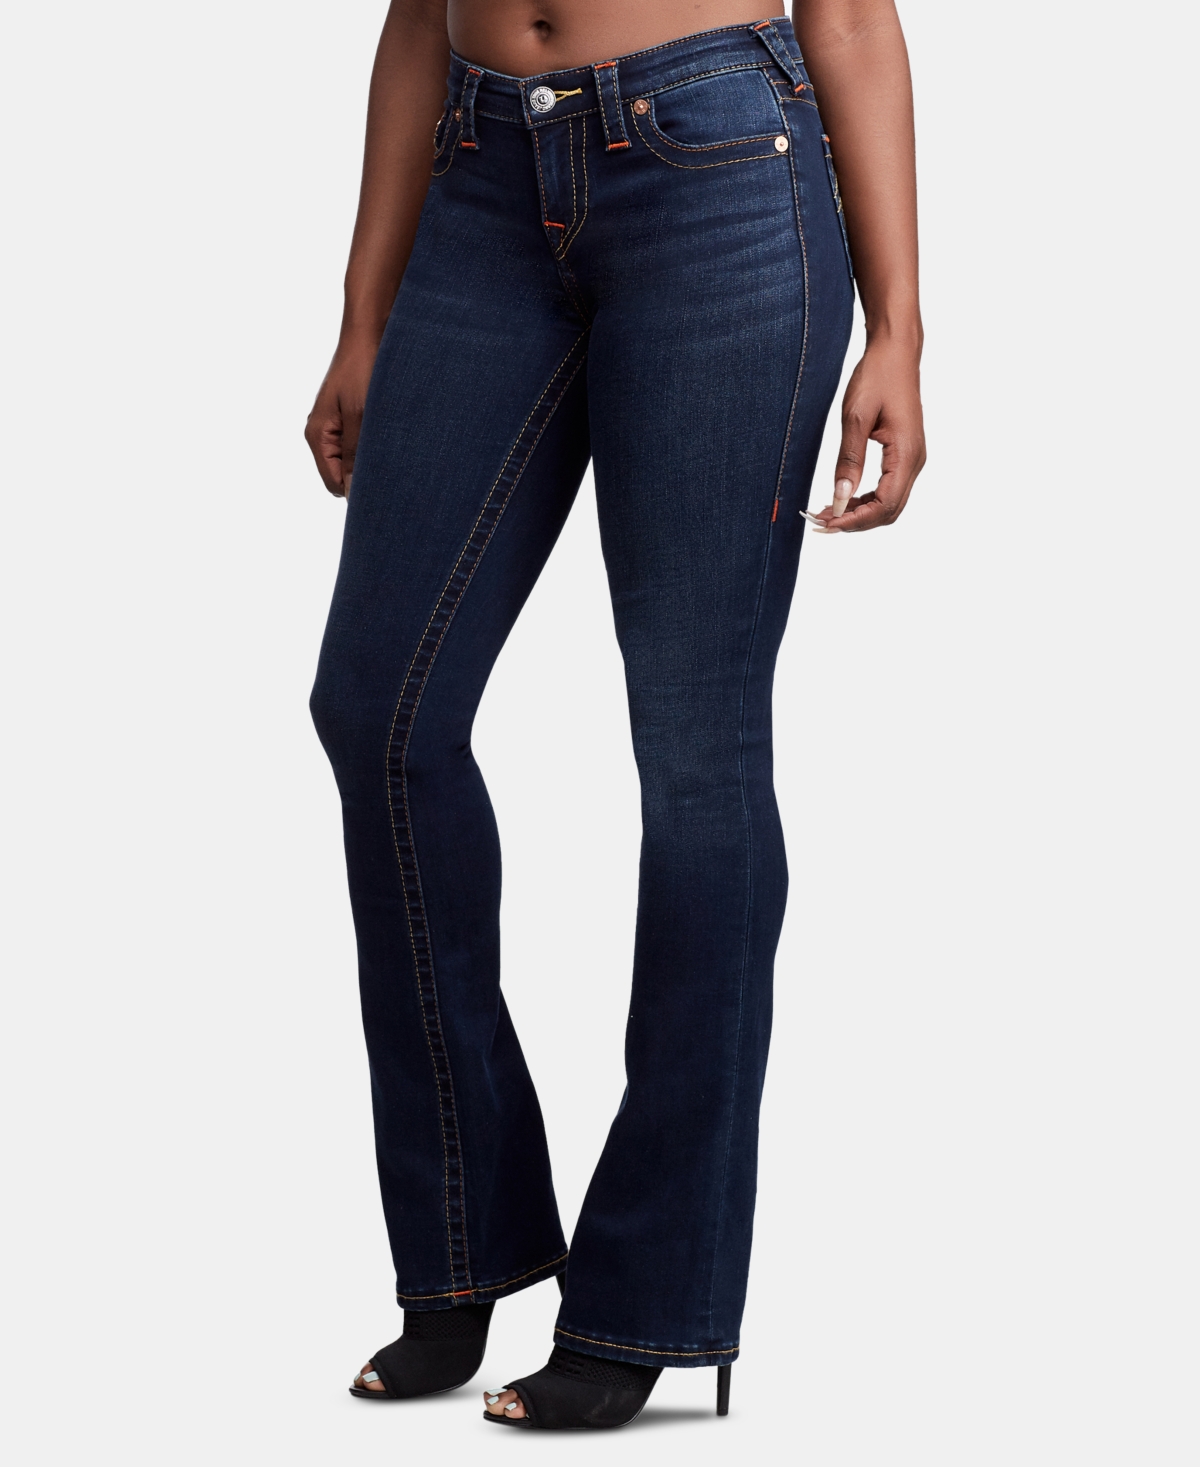 Becca Stretchy Mid Rise Bootcut Jeans - Indigo Upgrade